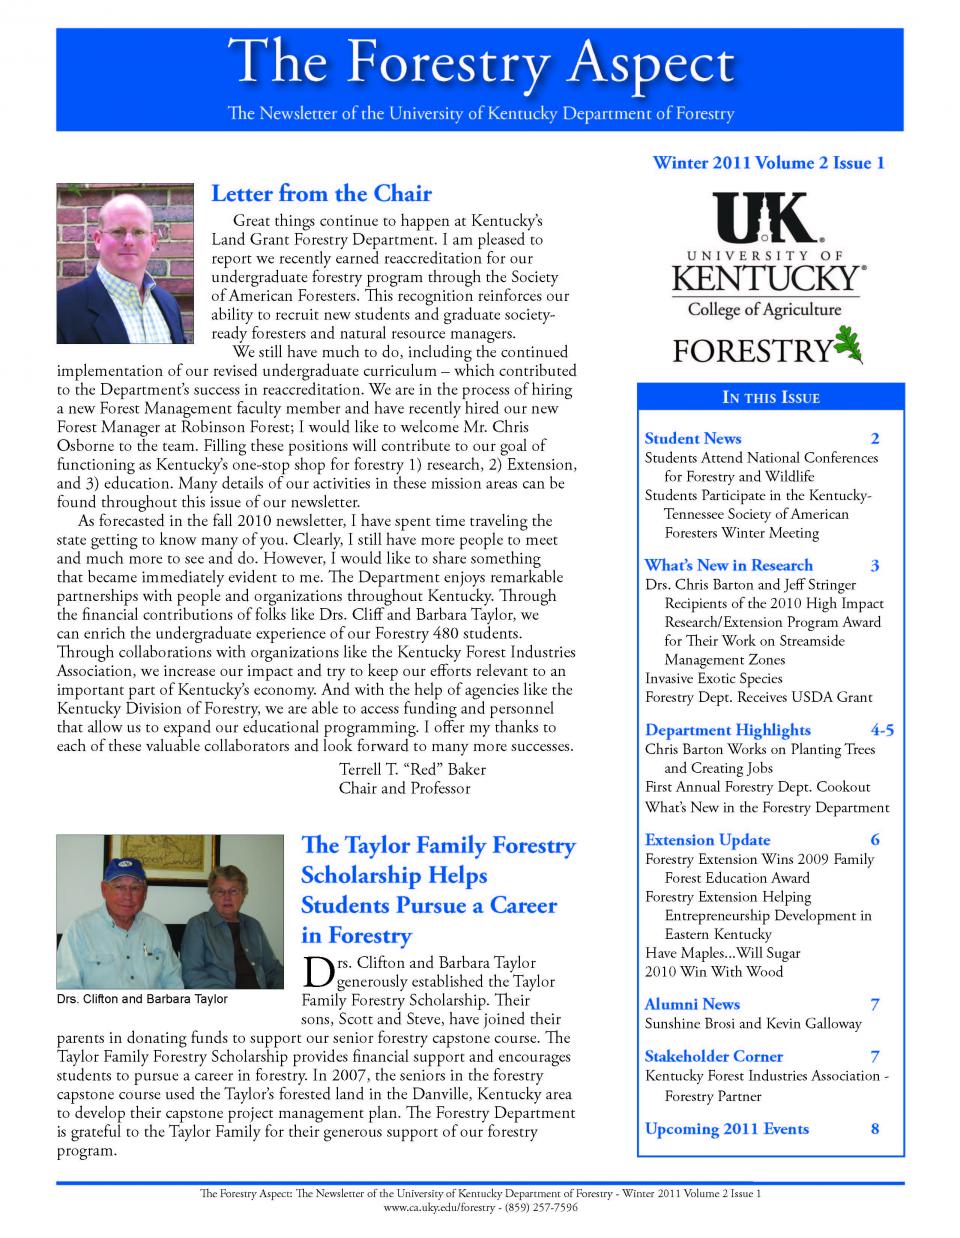 Cover page of the Department Newsletter - Winter 2011